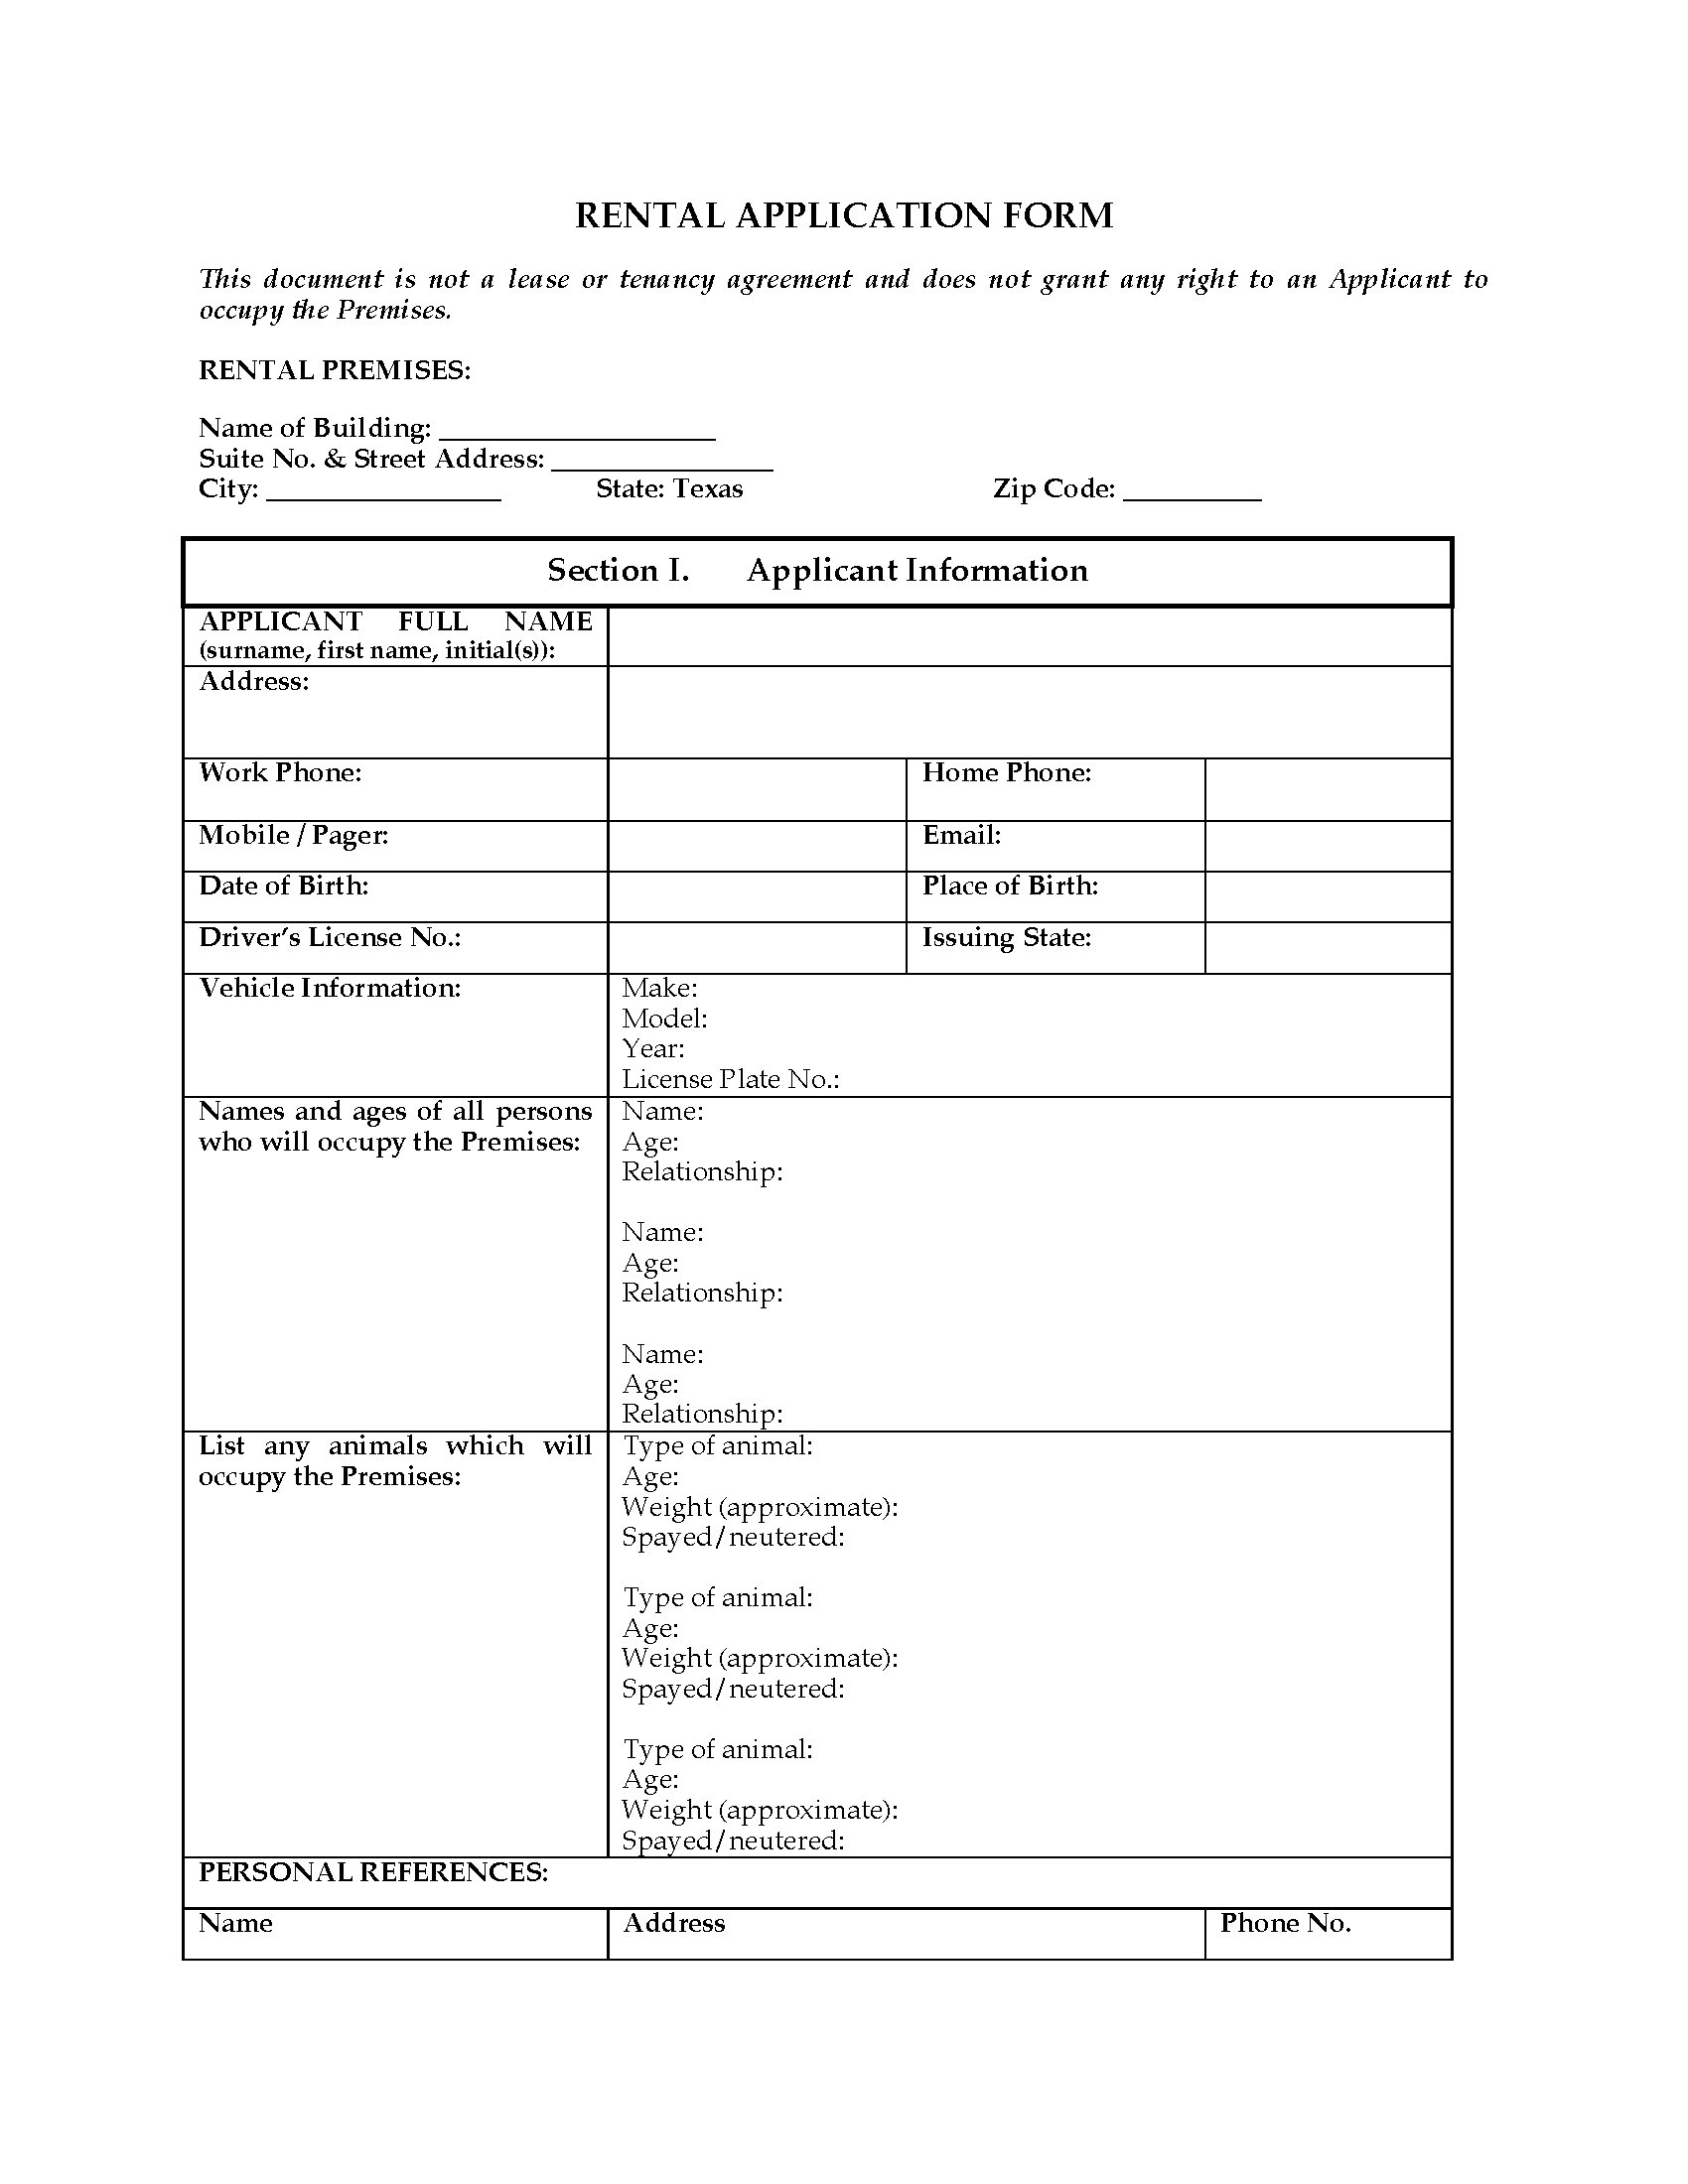 texas-rental-application-form-legal-forms-and-business-templates